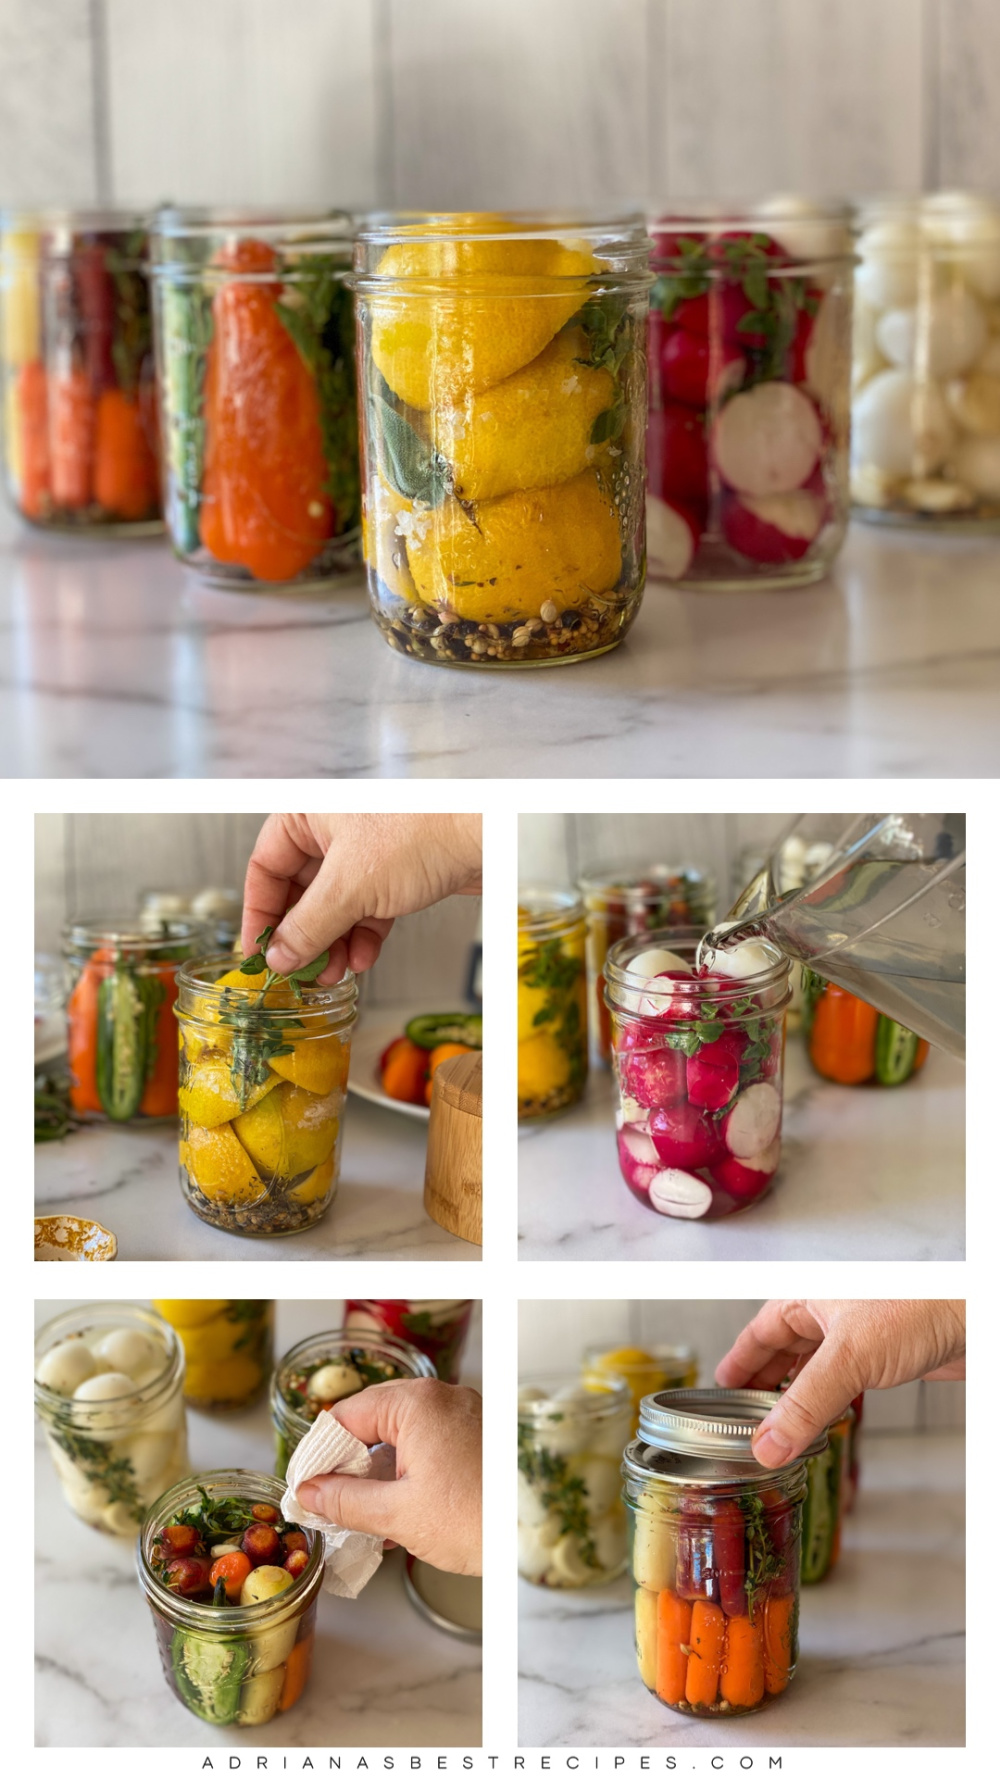 A collage of images showing the step by step process on how to fill the jars and place the lids before canning